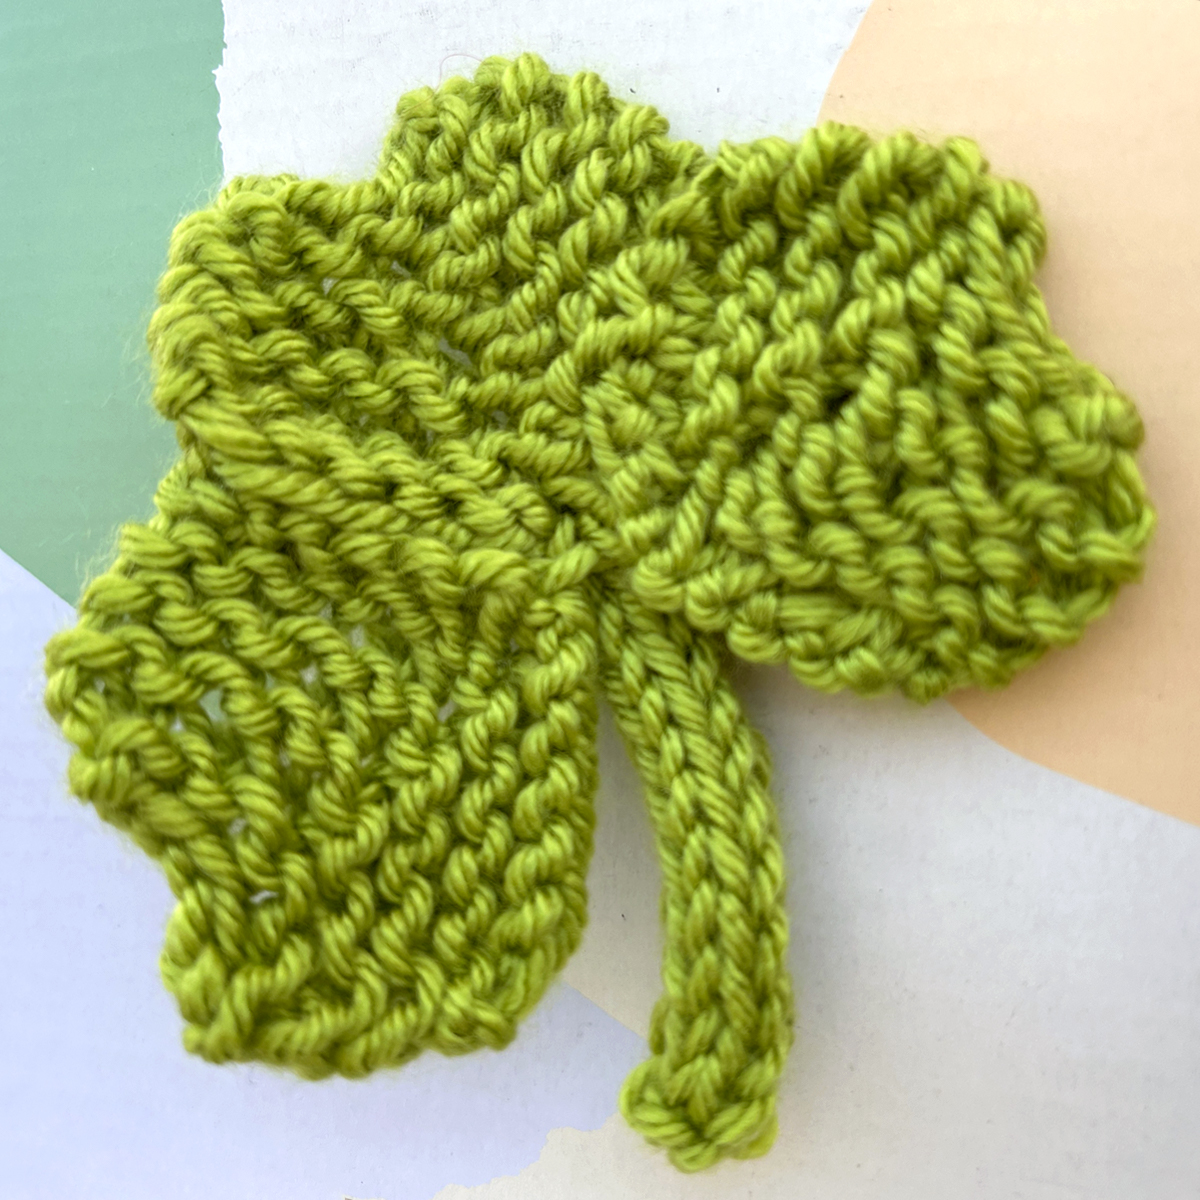 How to Knit a Shamrock Clover for Saint Patrick